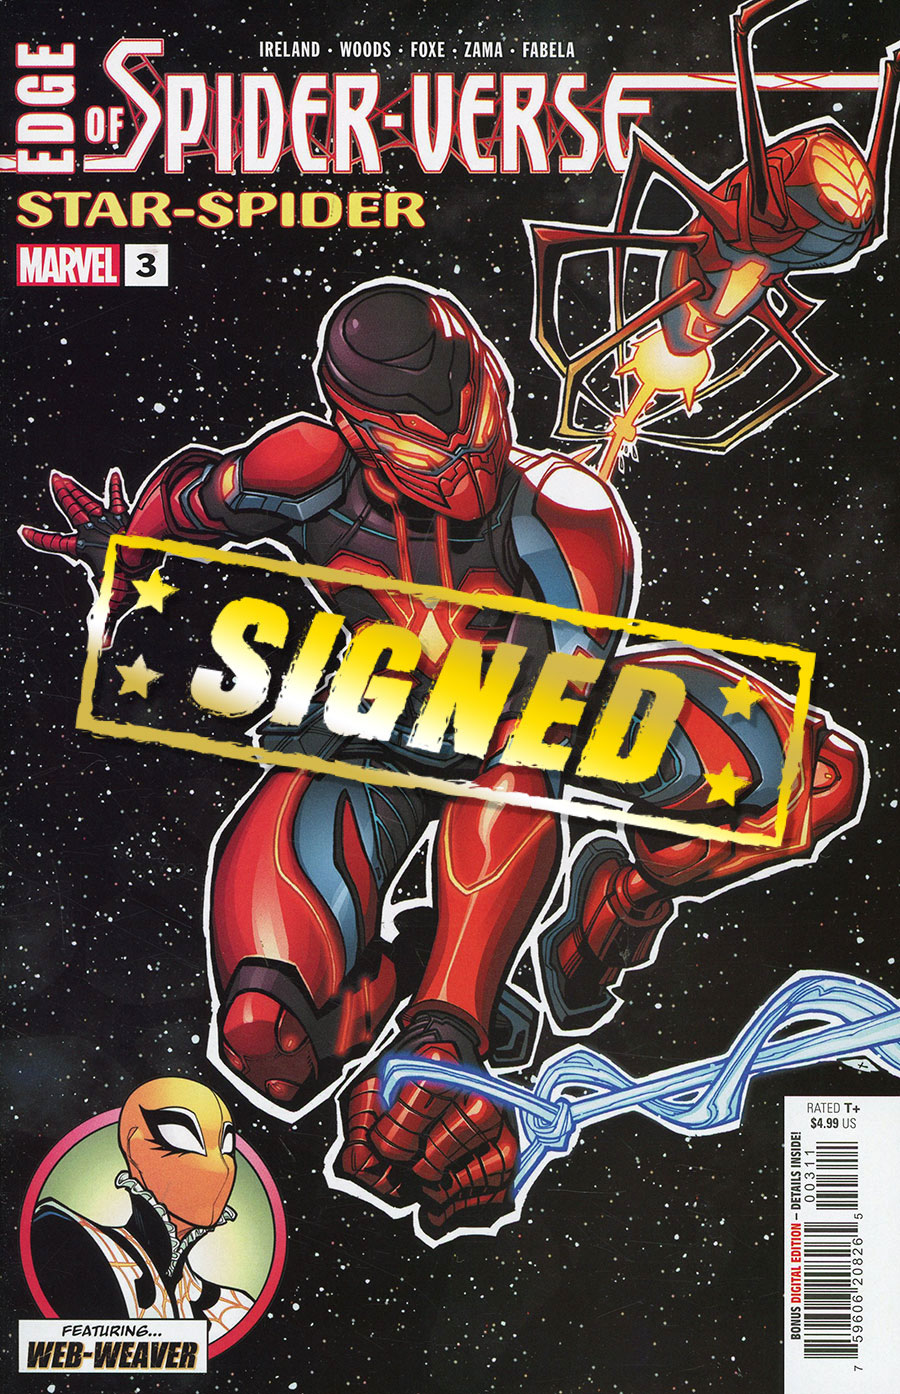 Edge Of Spider-Verse Vol 4 #3 Cover J DF Signed By Steve Foxe